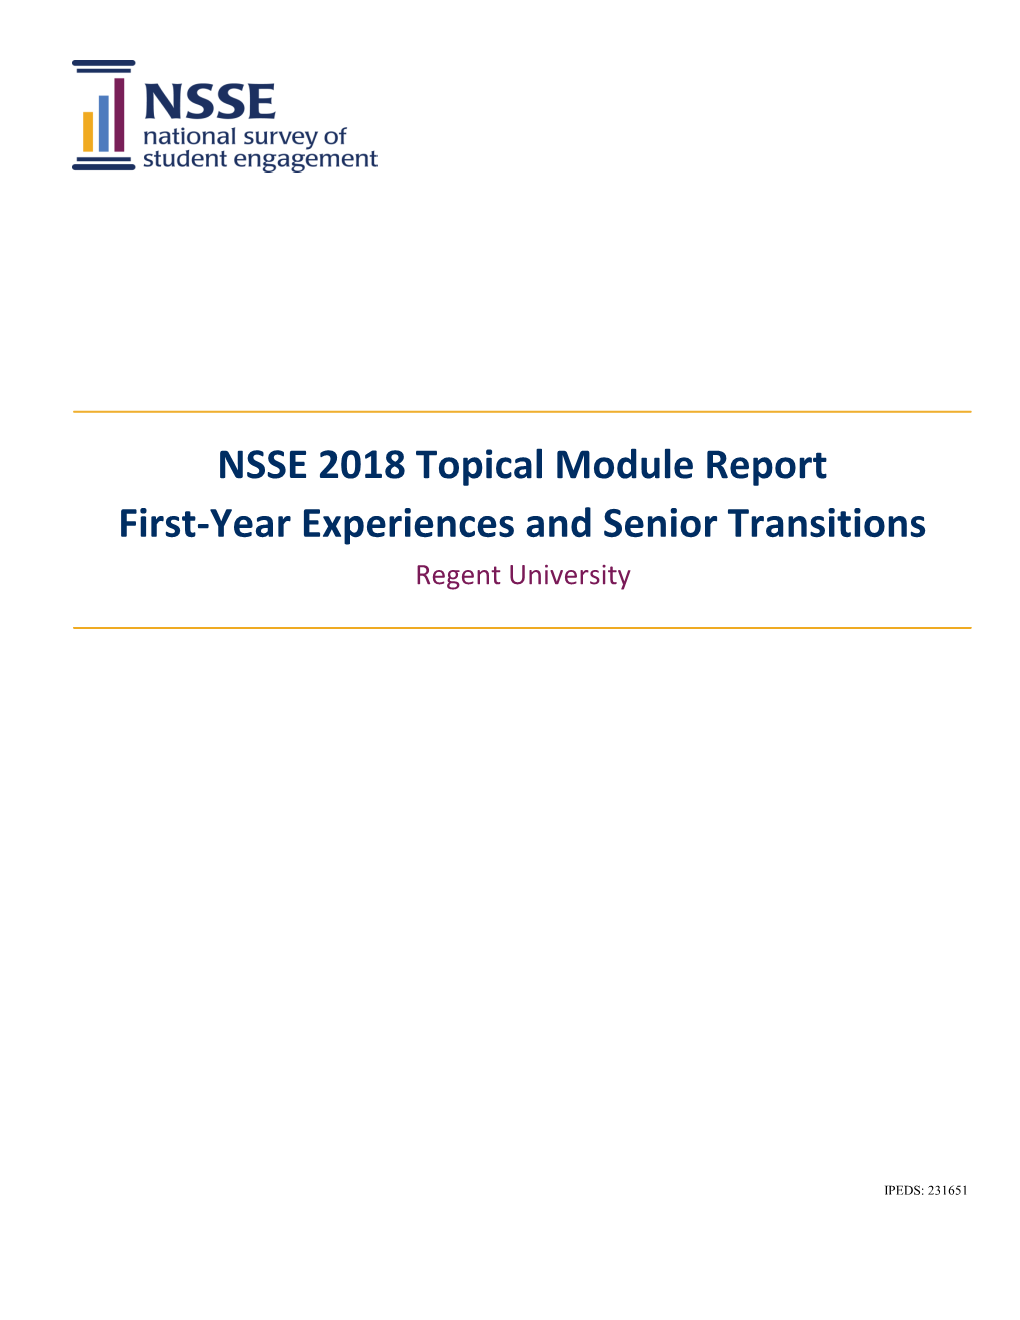 NSSE 2018 Topical Module Report First-Year Experiences and Senior Transitions Regent University